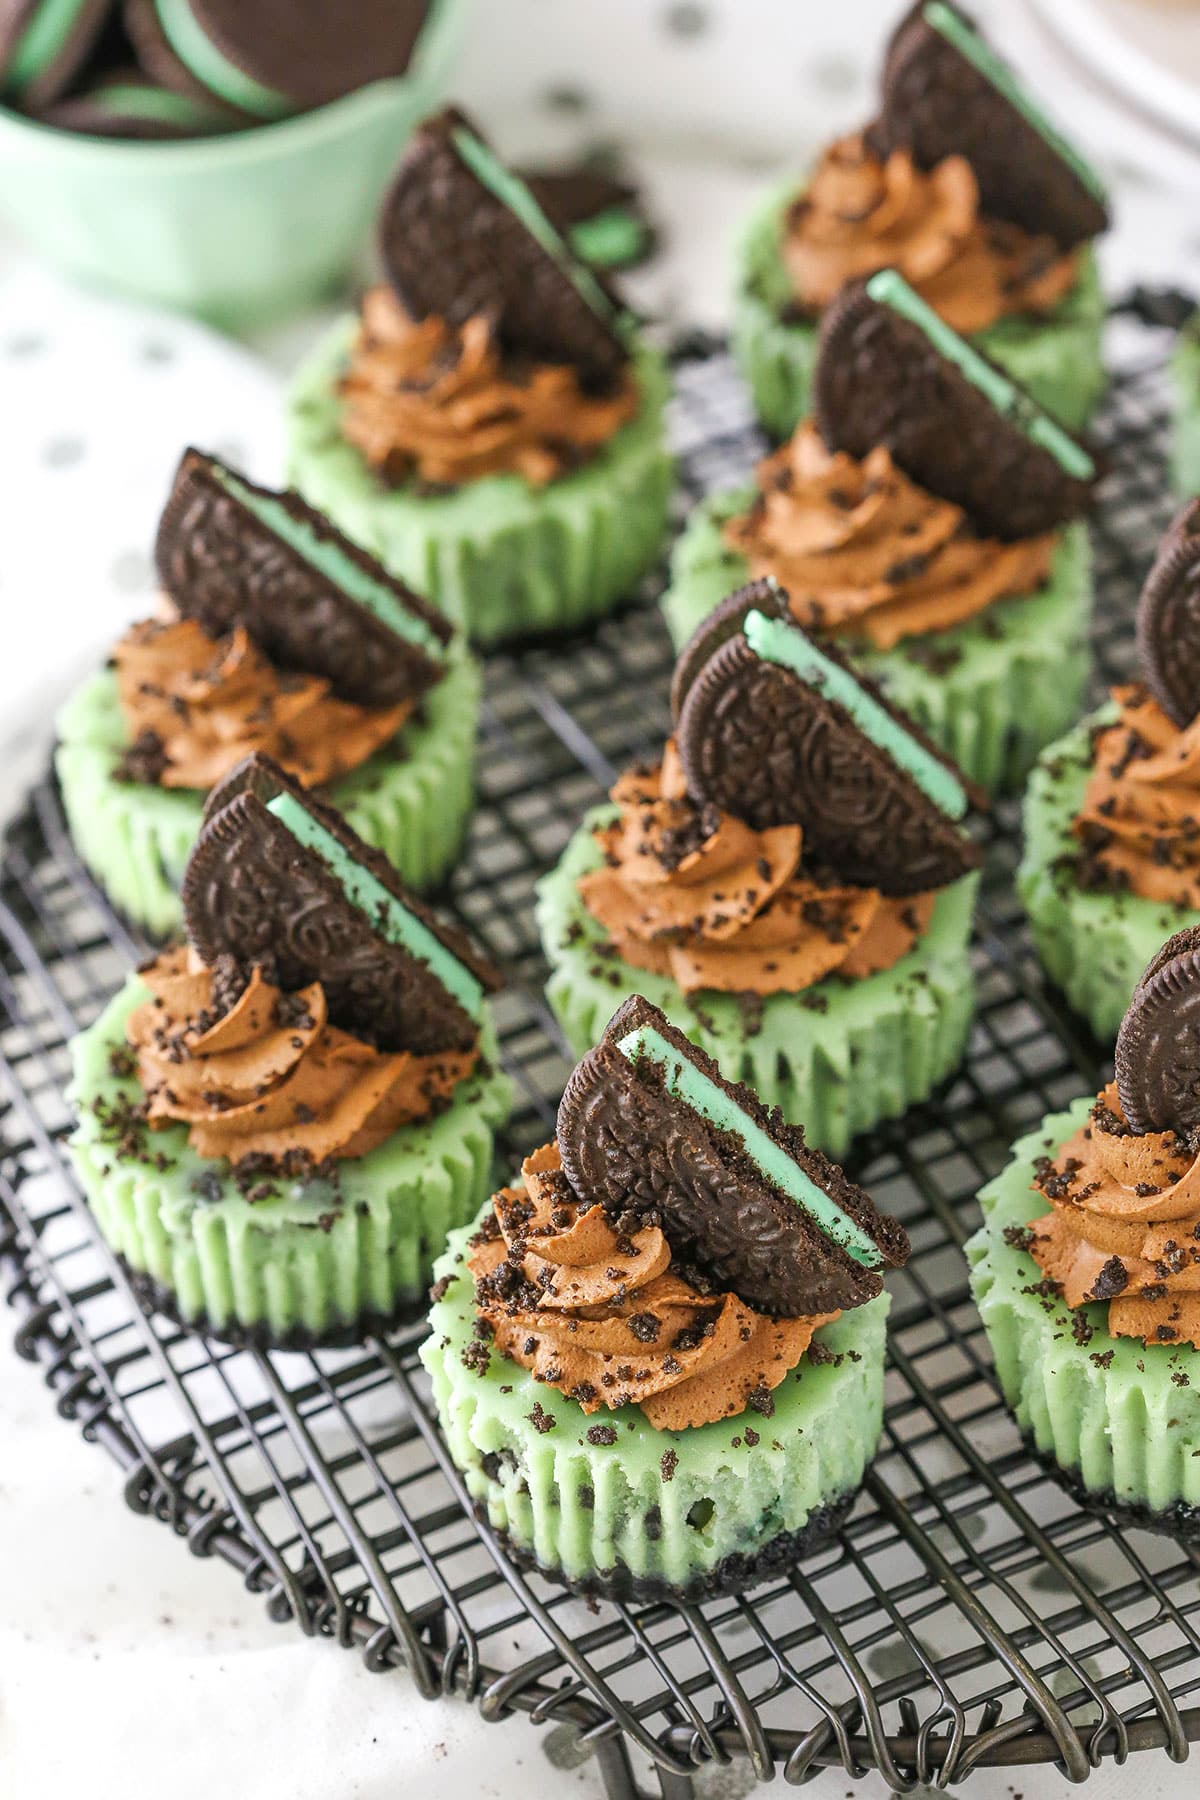 Overhead view of Mini Mint Chocolate Oreo Cheesecakes on a gray metal stand